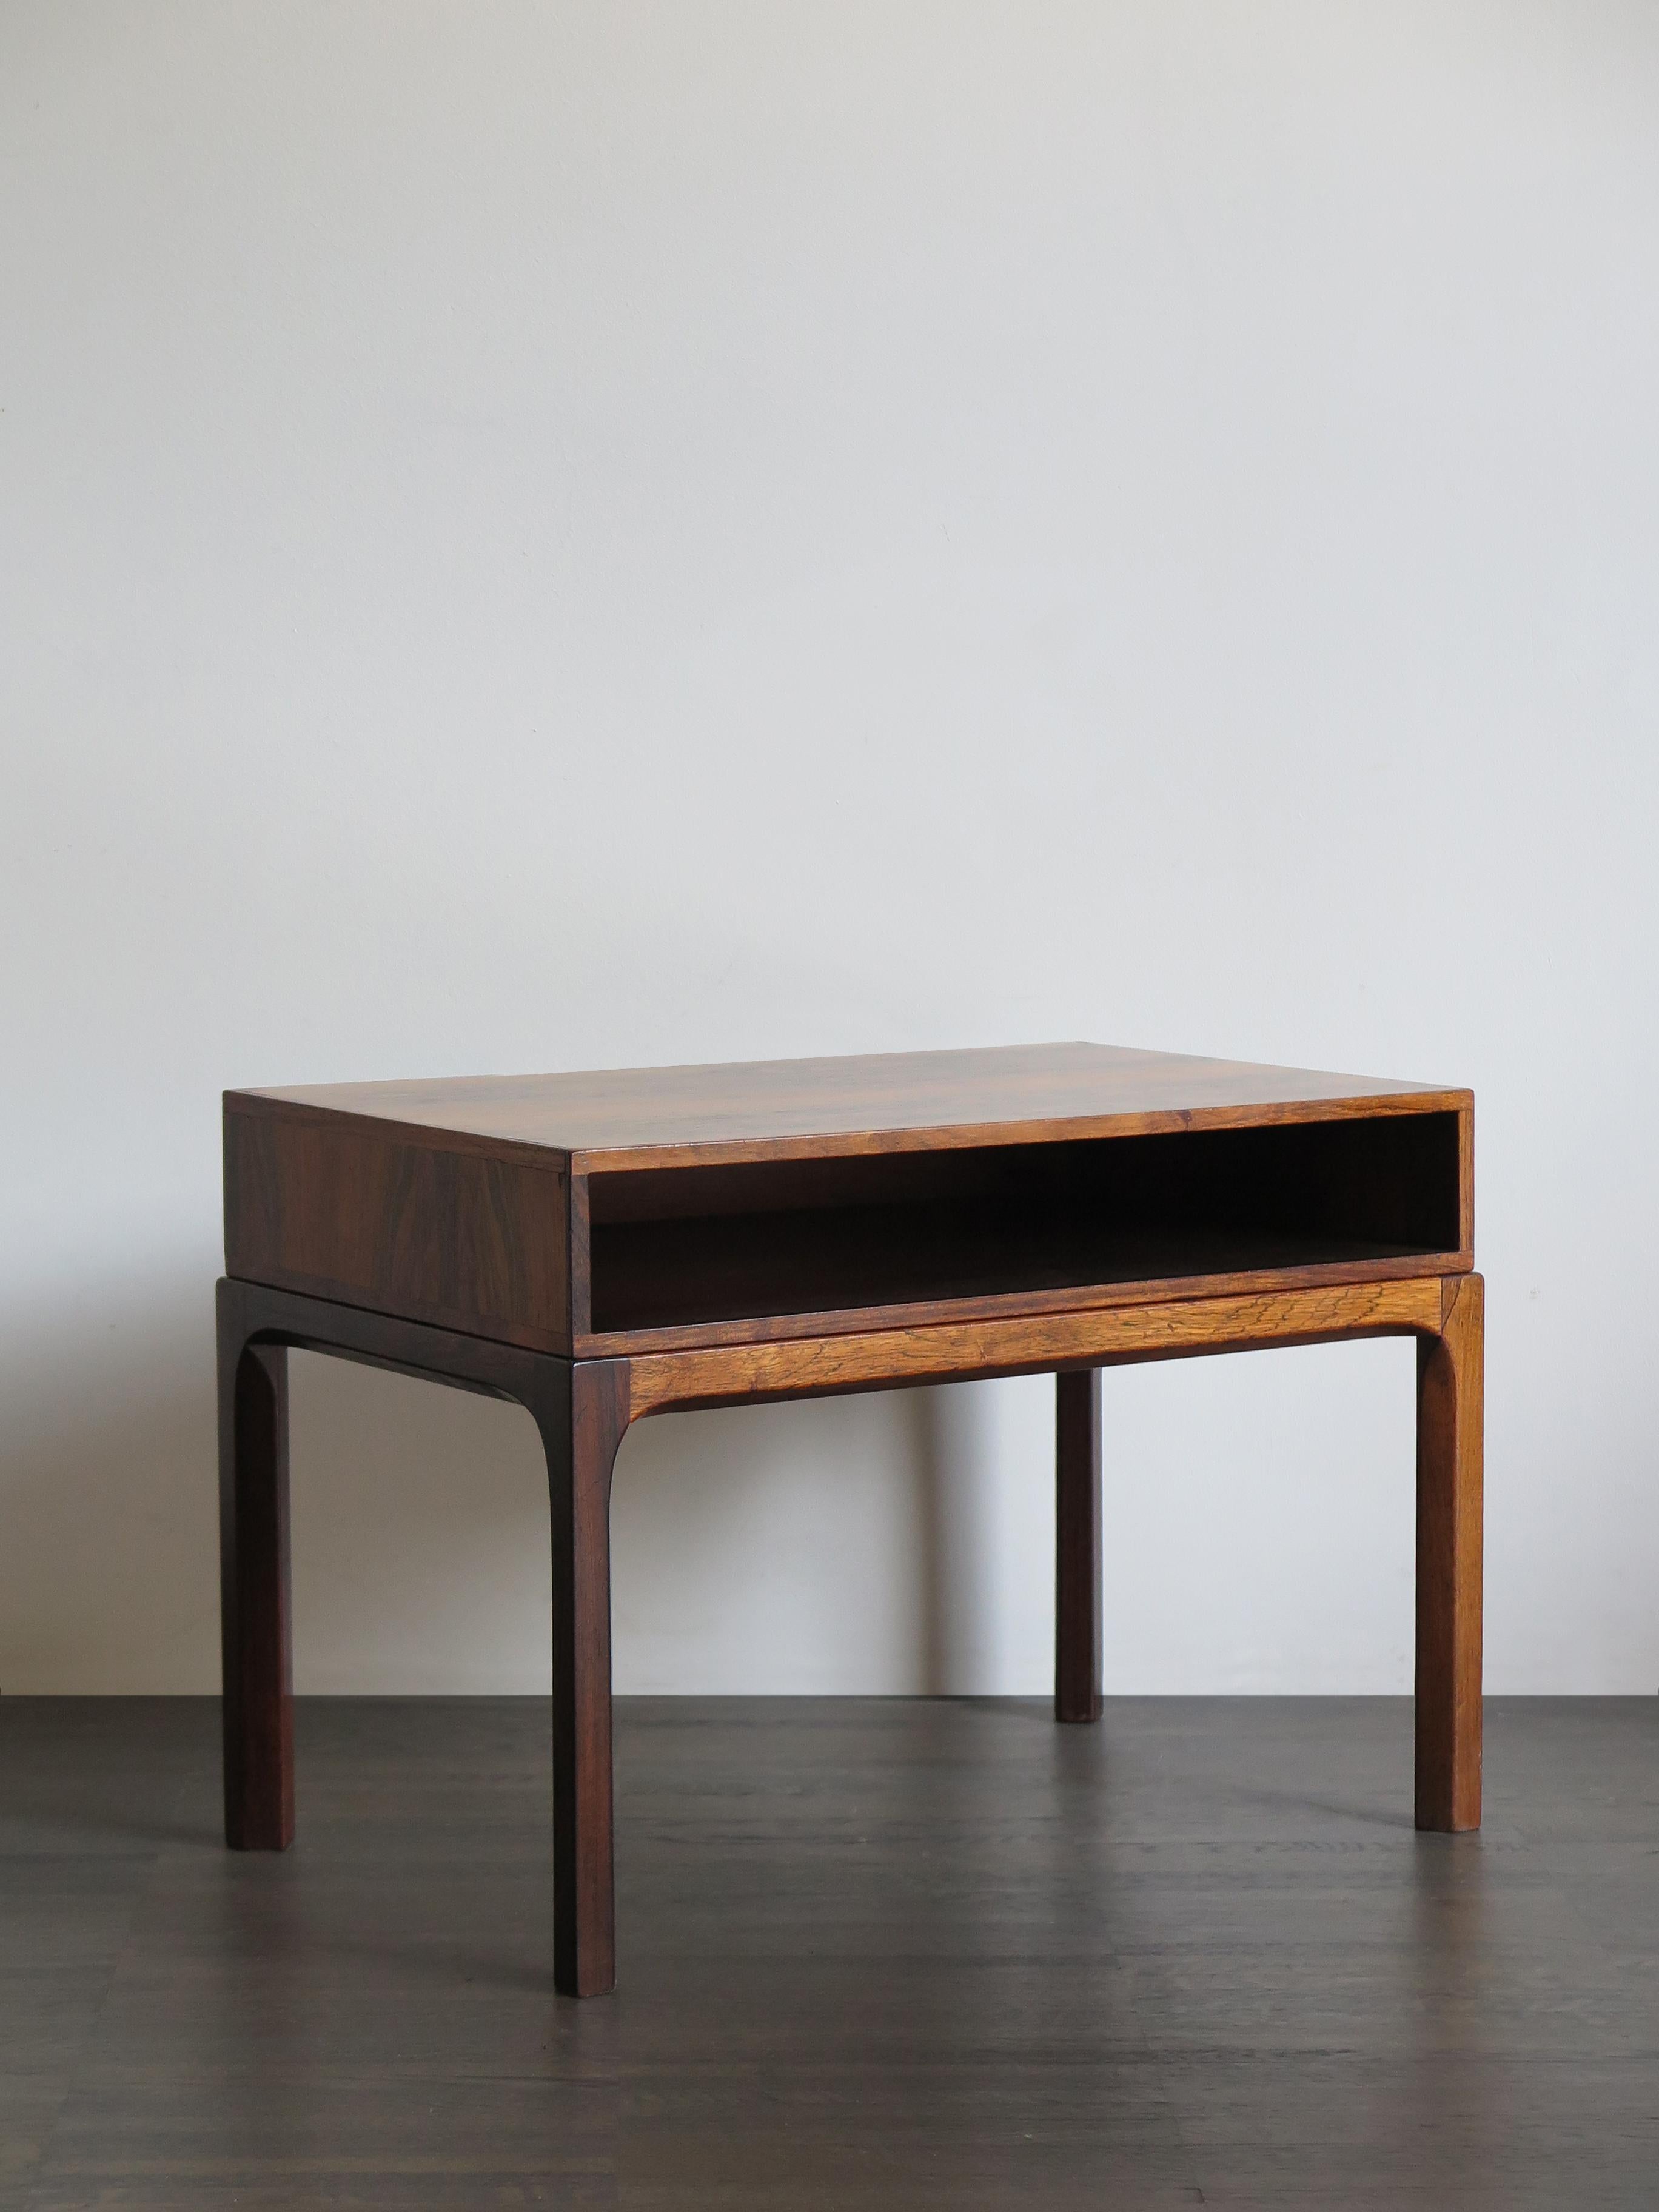 Scandinavian dark wood bedside table or side table design Aksel Kjersgaard for Odder Furniture, 1950s made in Denmark 1960s.


Please note that the item is original of the period and this shows normal signs of age and use.